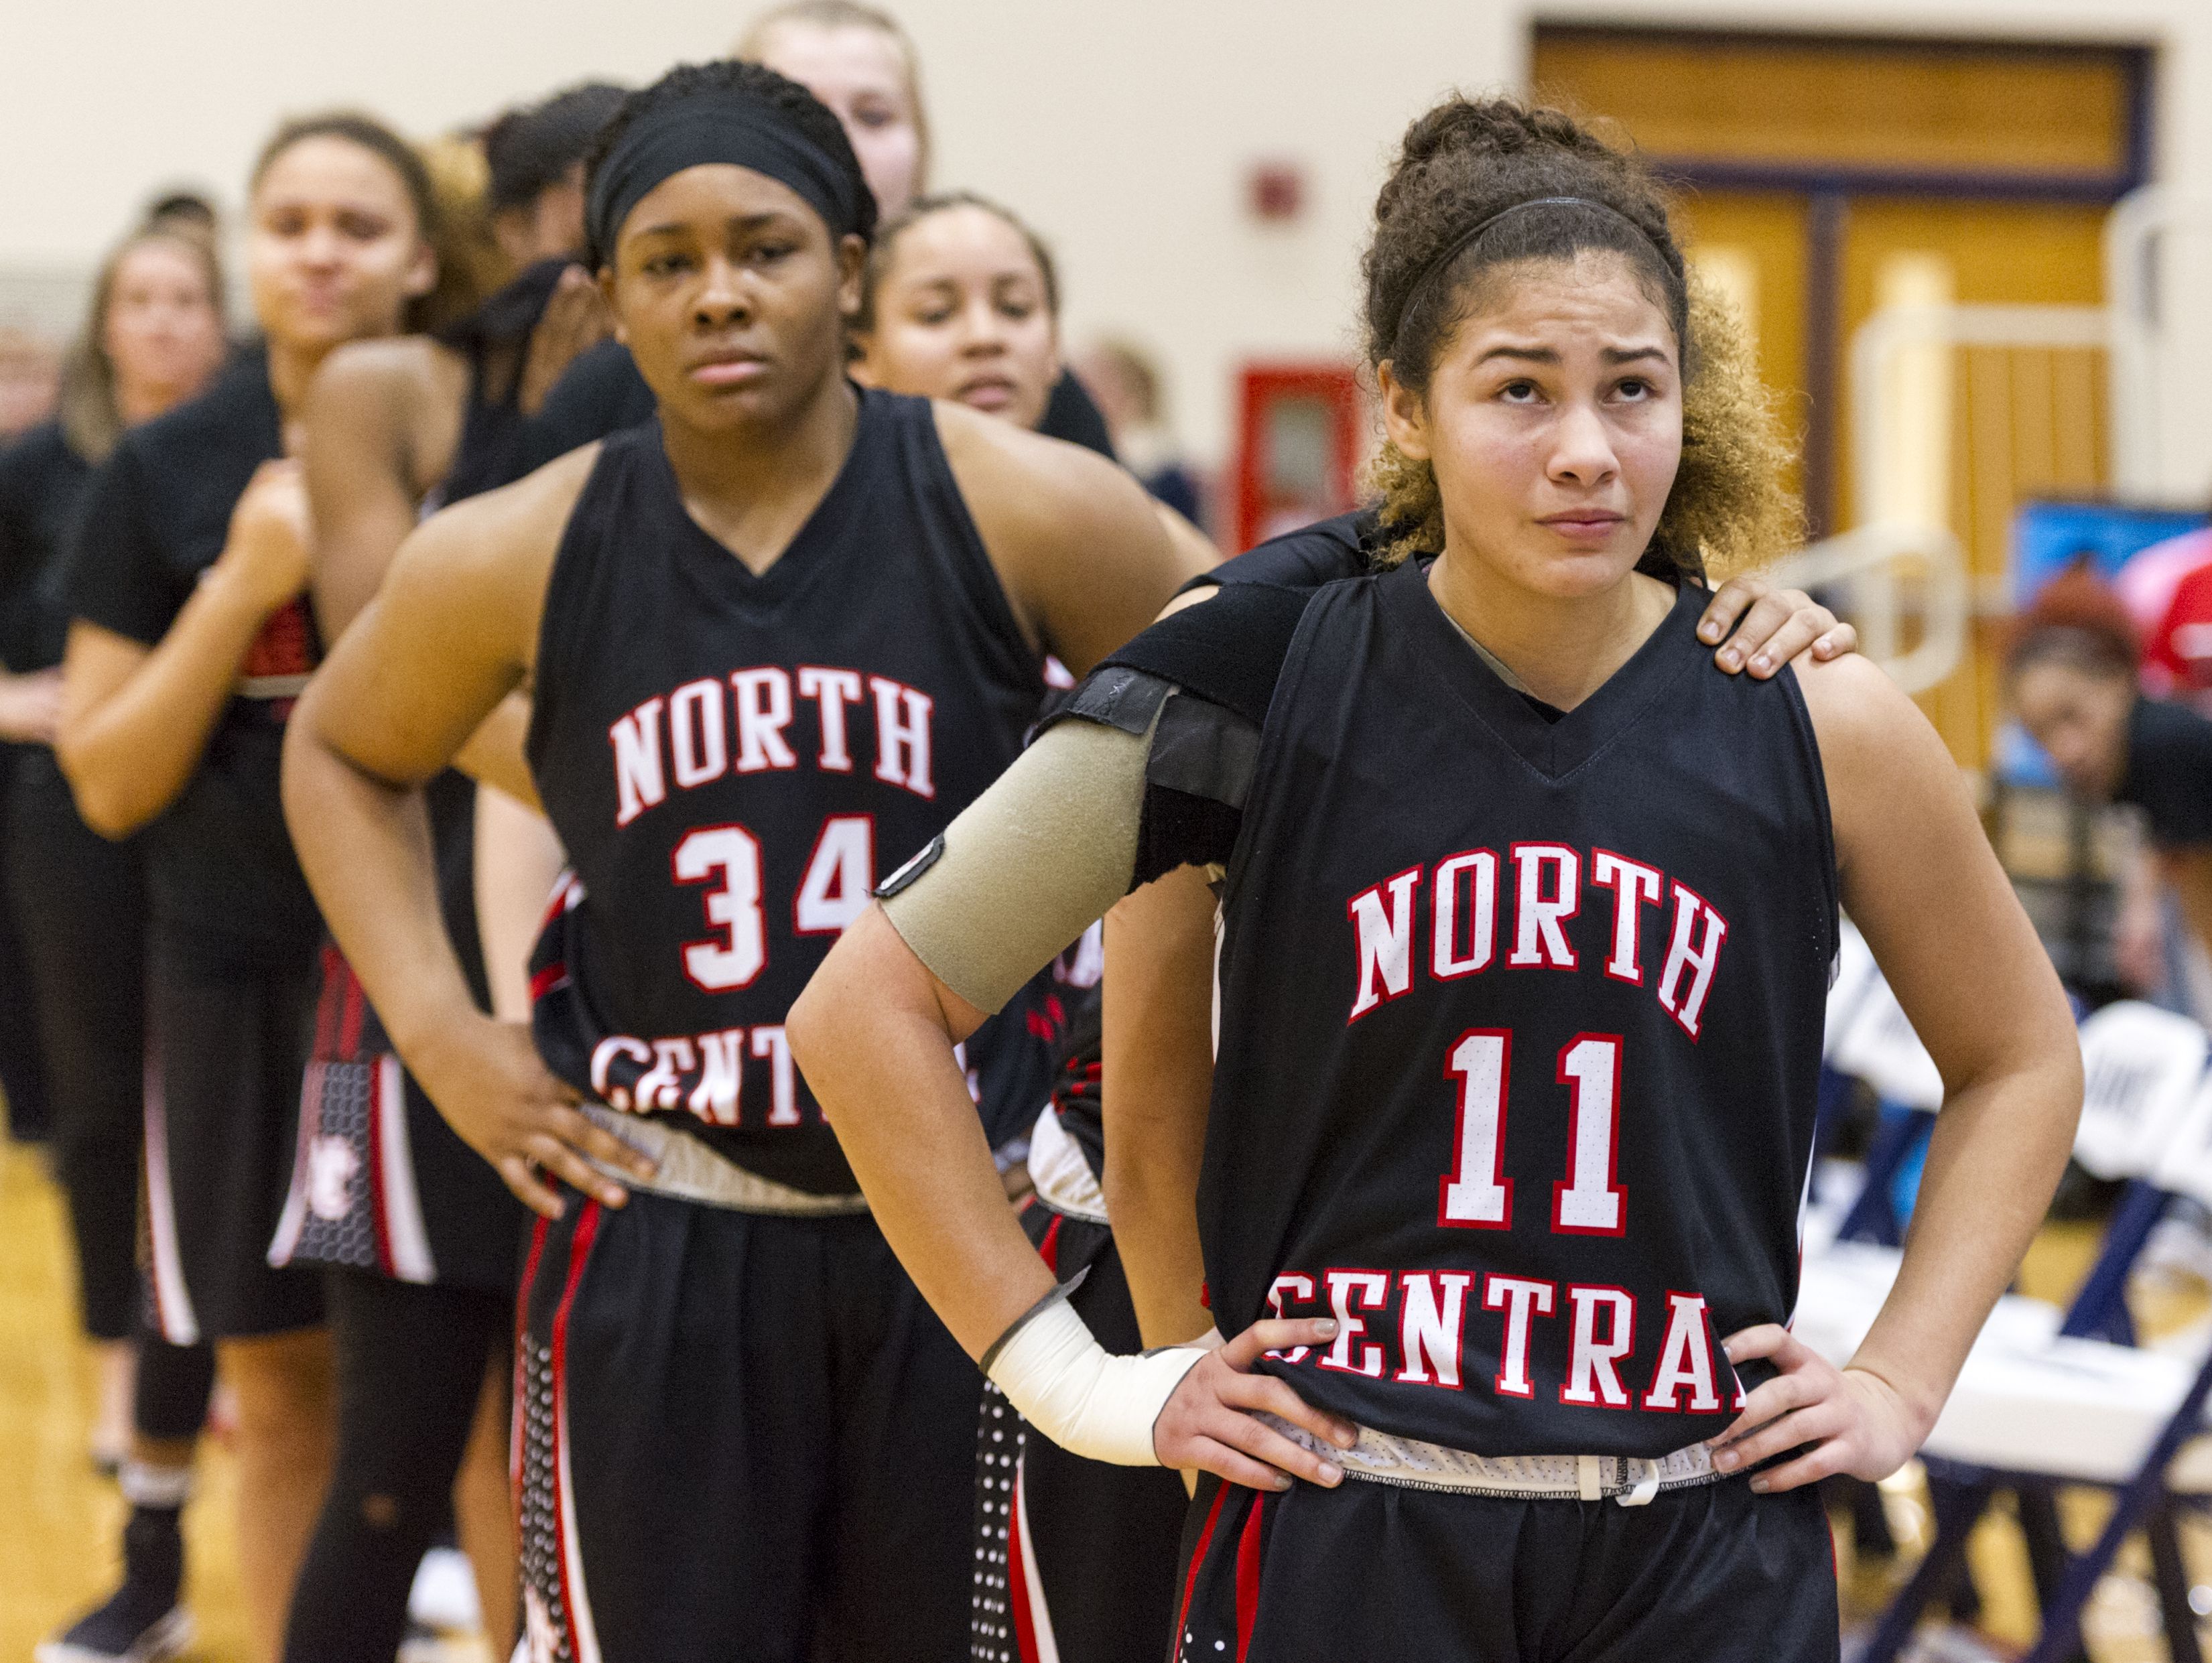 North Central High School junior Taylor Ramey (11) and her teammates react to their loss of the IHSAA 4A Girls' Basketball Tournament Regional championship game, Saturday, Feb. 11, 2017, at Decatur Central High School. Pike won in overtime, 61-59.